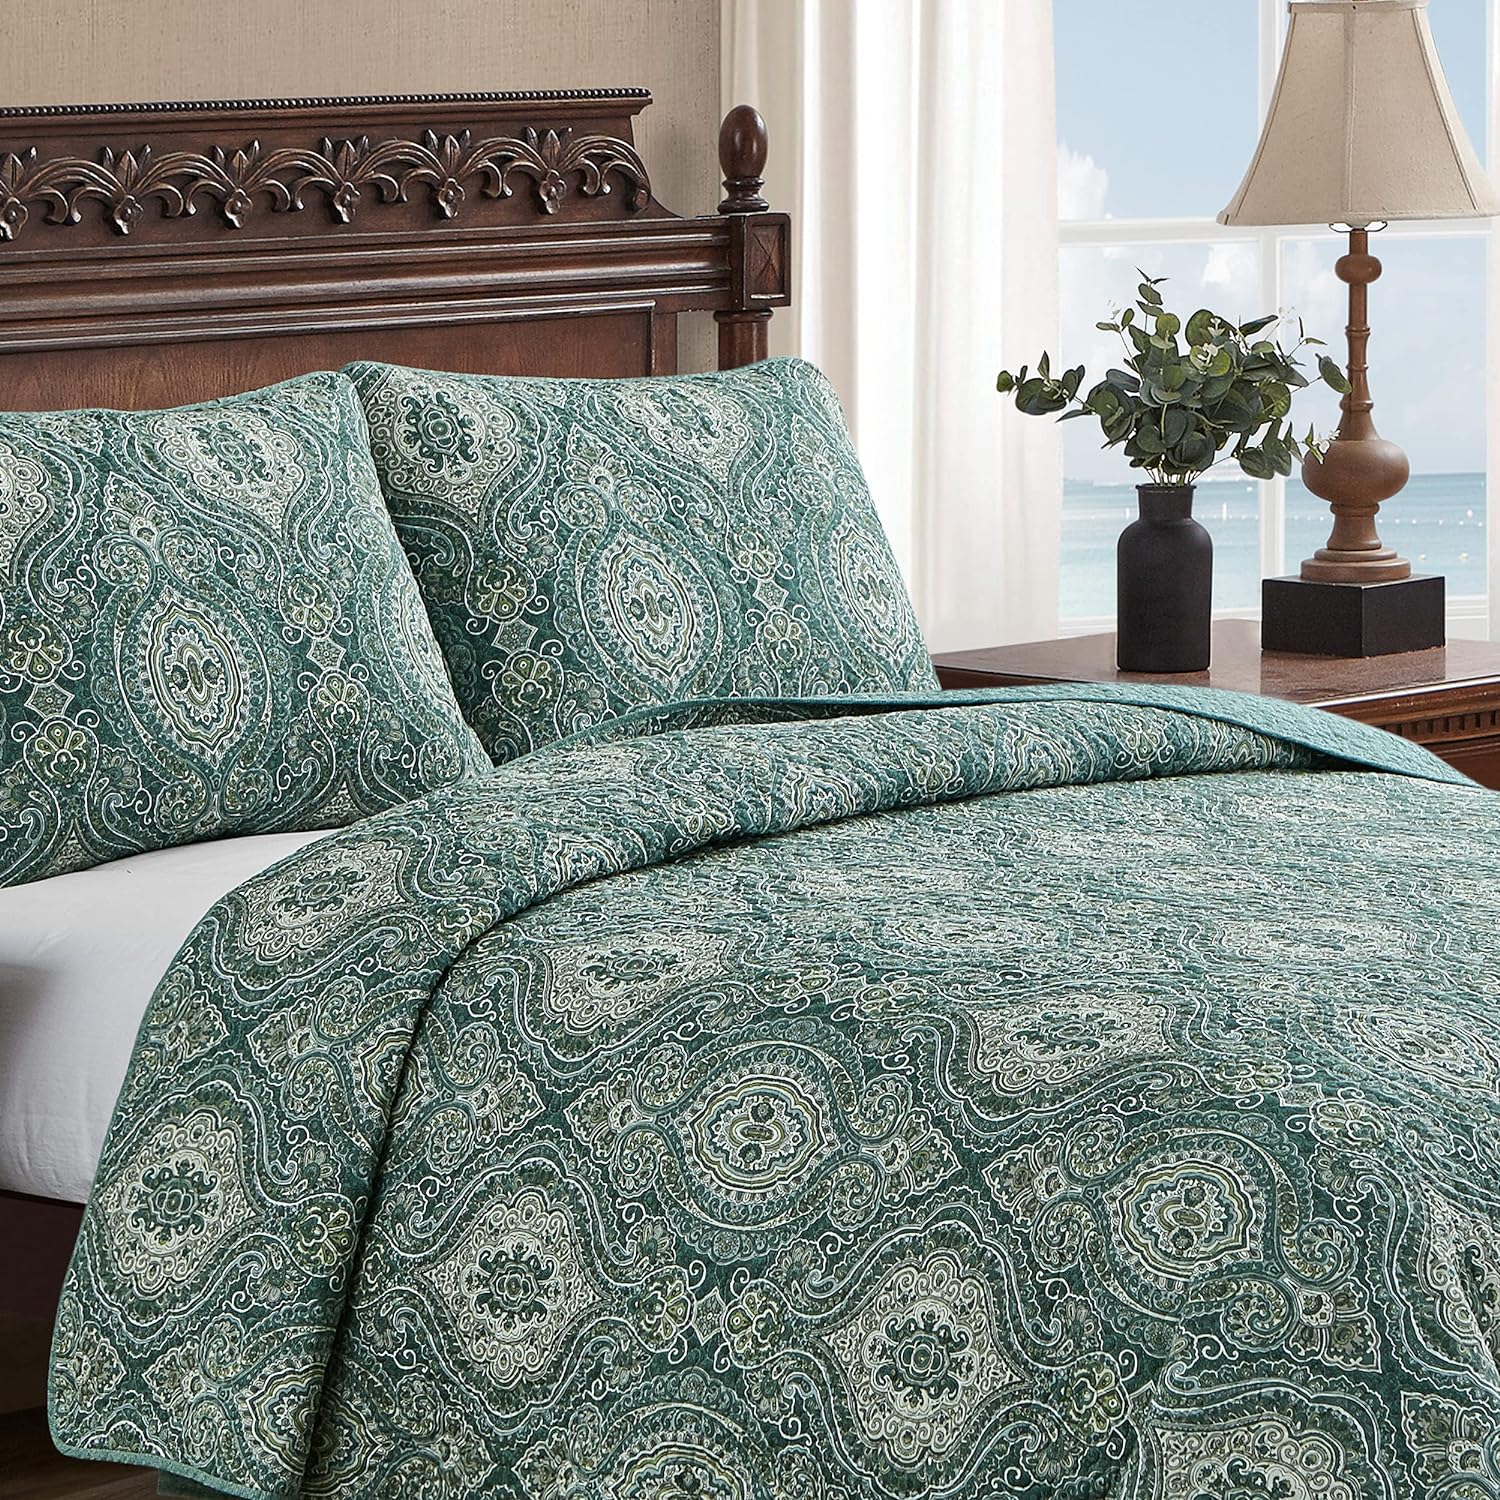 TKM Home Home Turtle Cove Collection Quilt Set-100% Cotton, Reversible Bedding With Matching Sham(S), Pre-Washed For Added So…